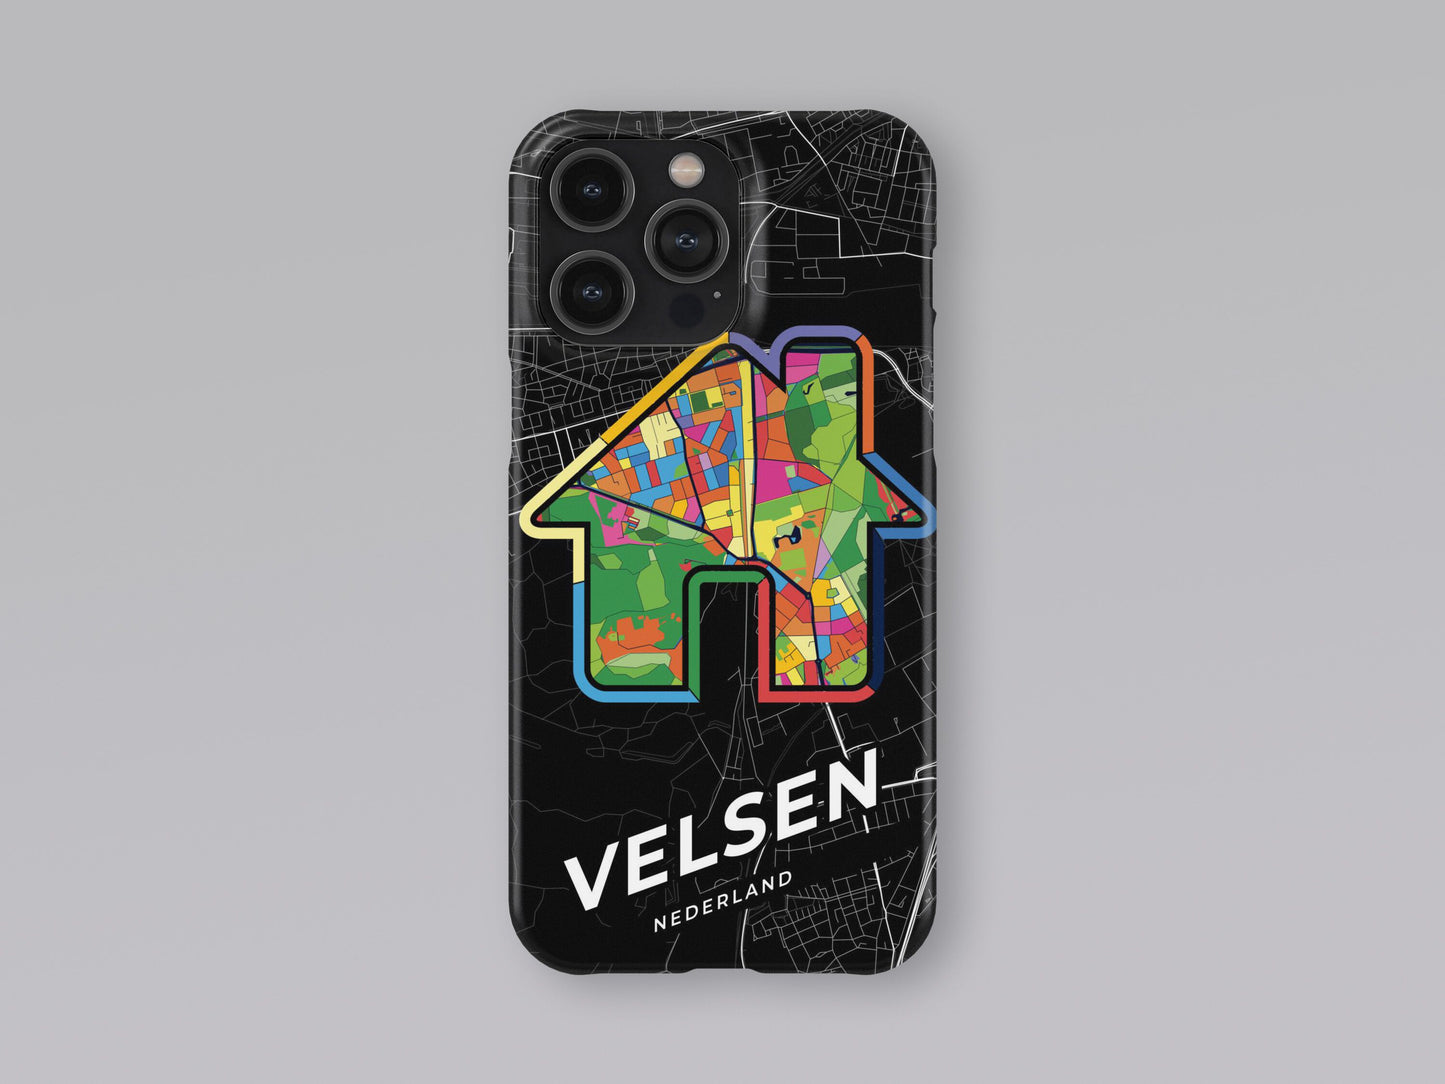 Velsen Netherlands slim phone case with colorful icon 3